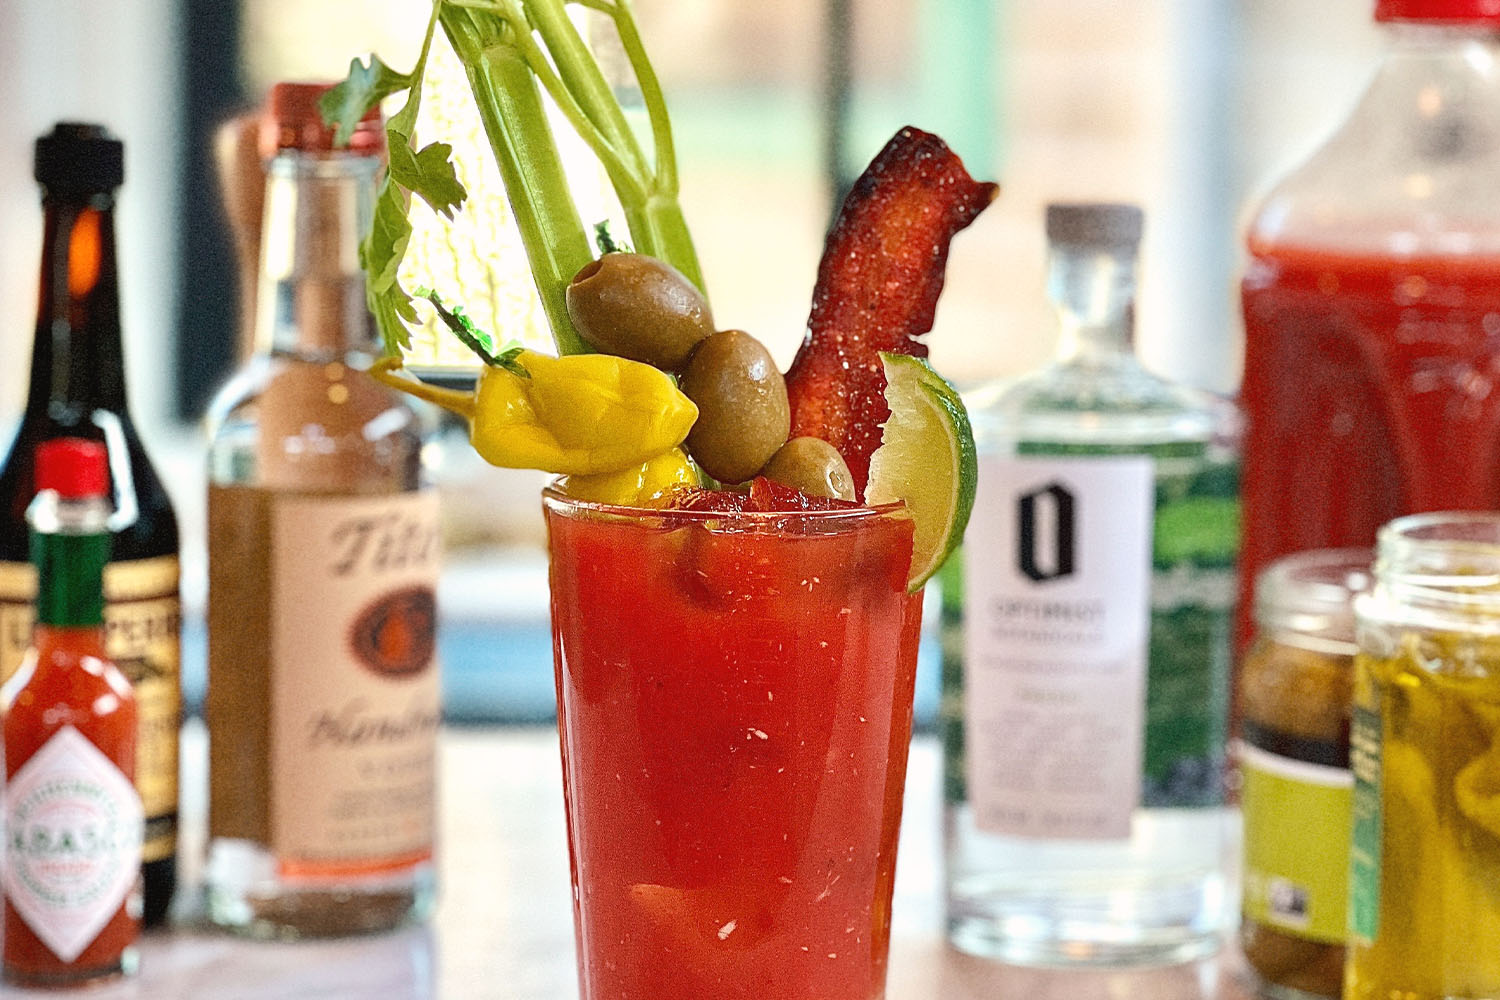 Have fun with your bloodys' spirits and garnishes